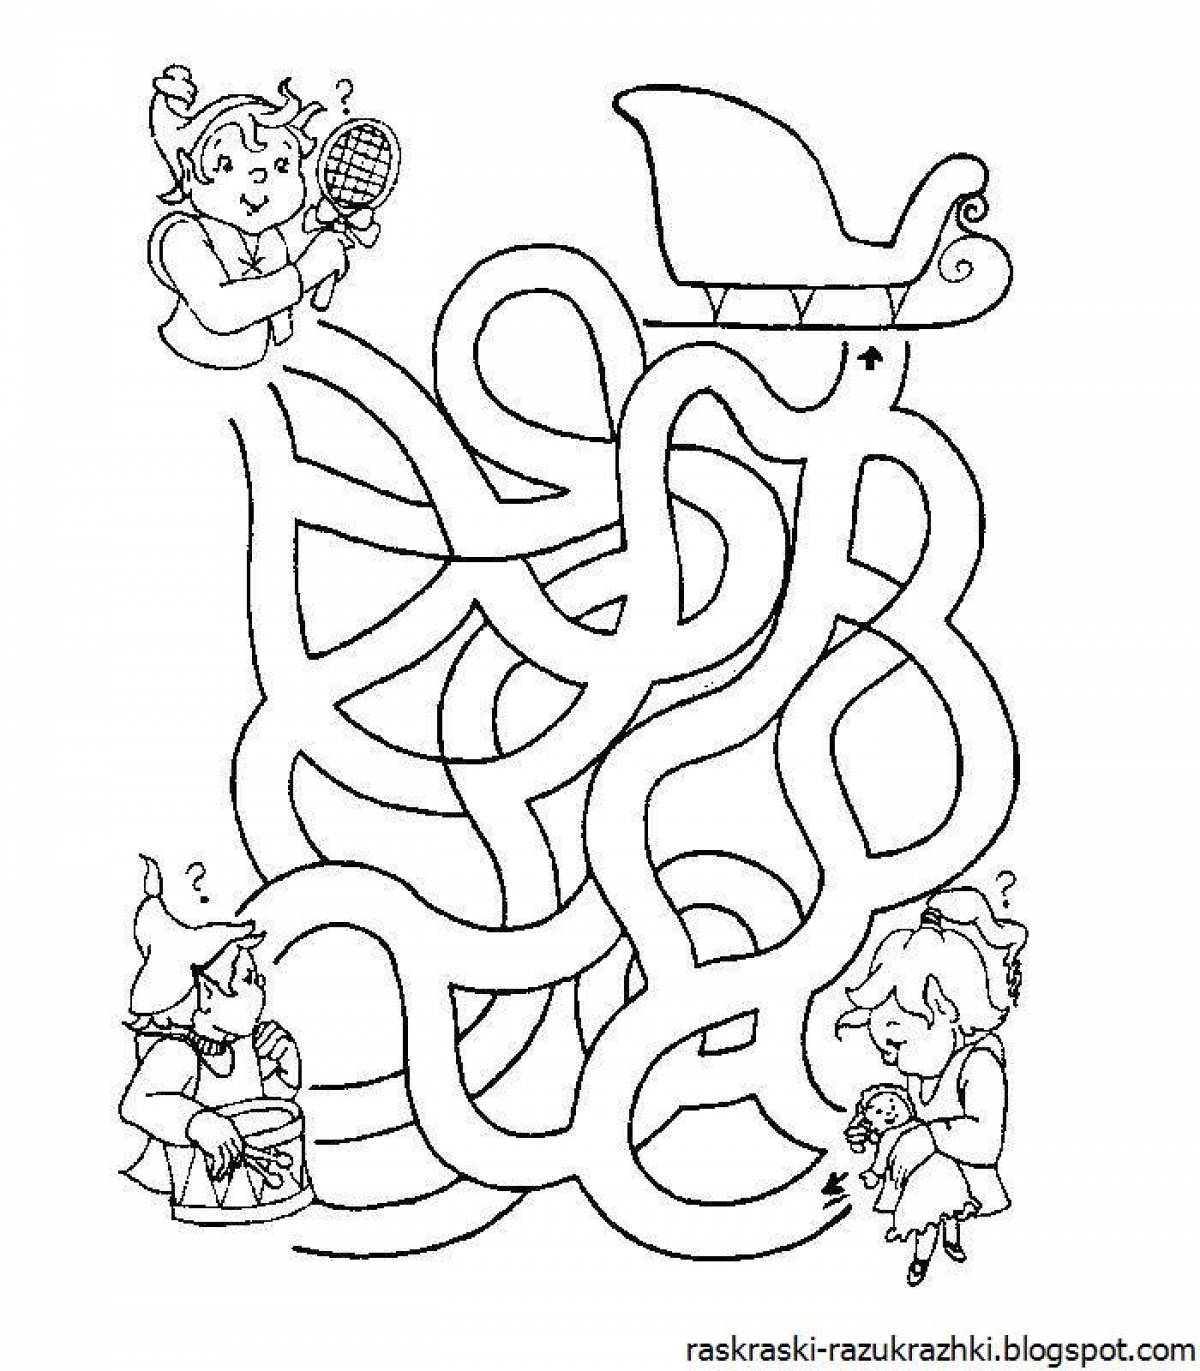 Adorable maze coloring page